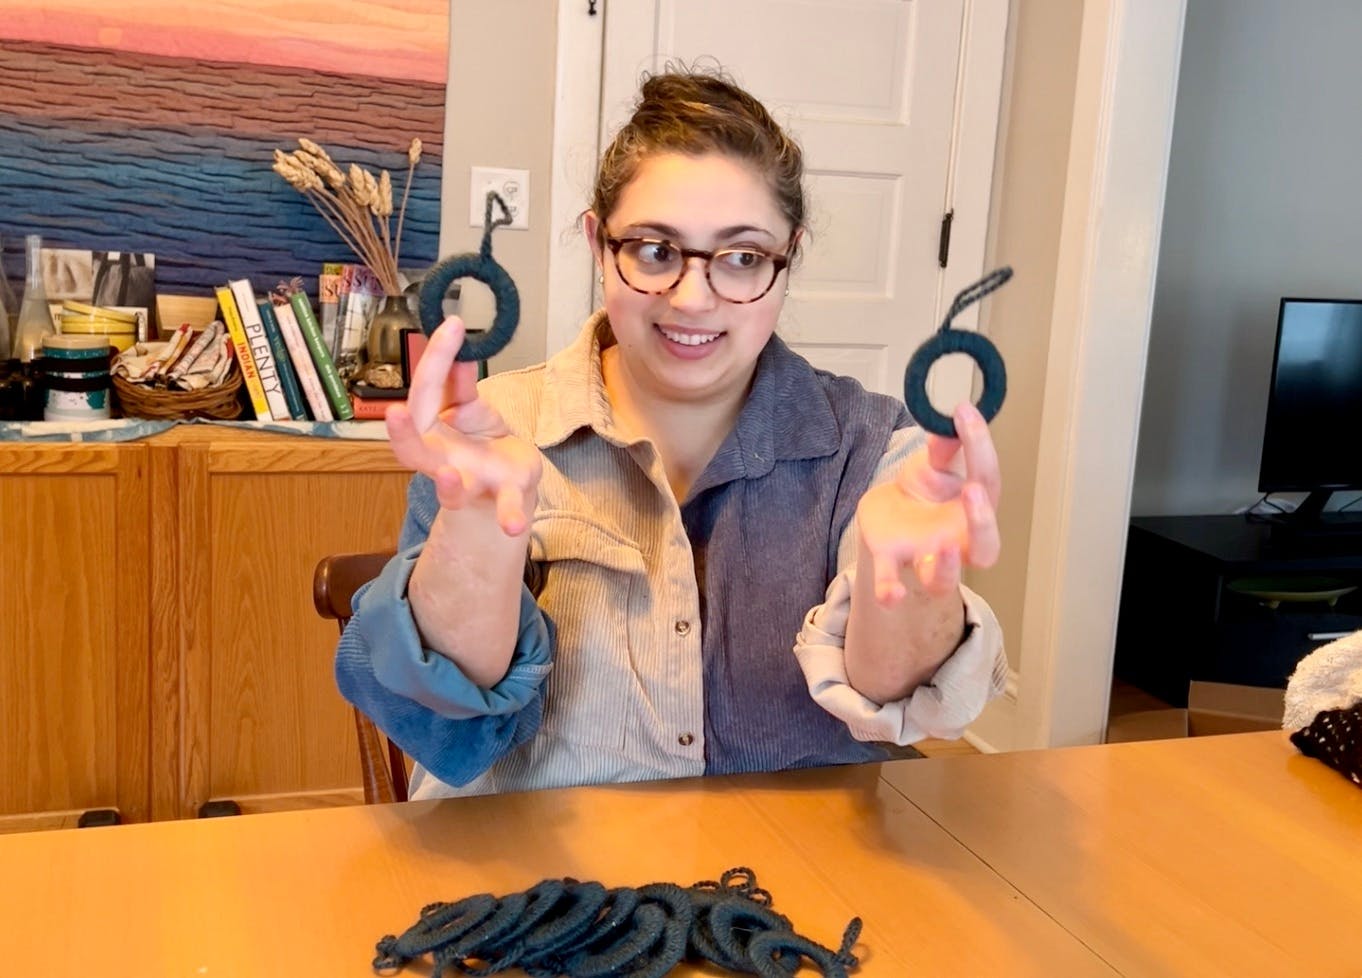 Holding up two yarn covered rings and smiling